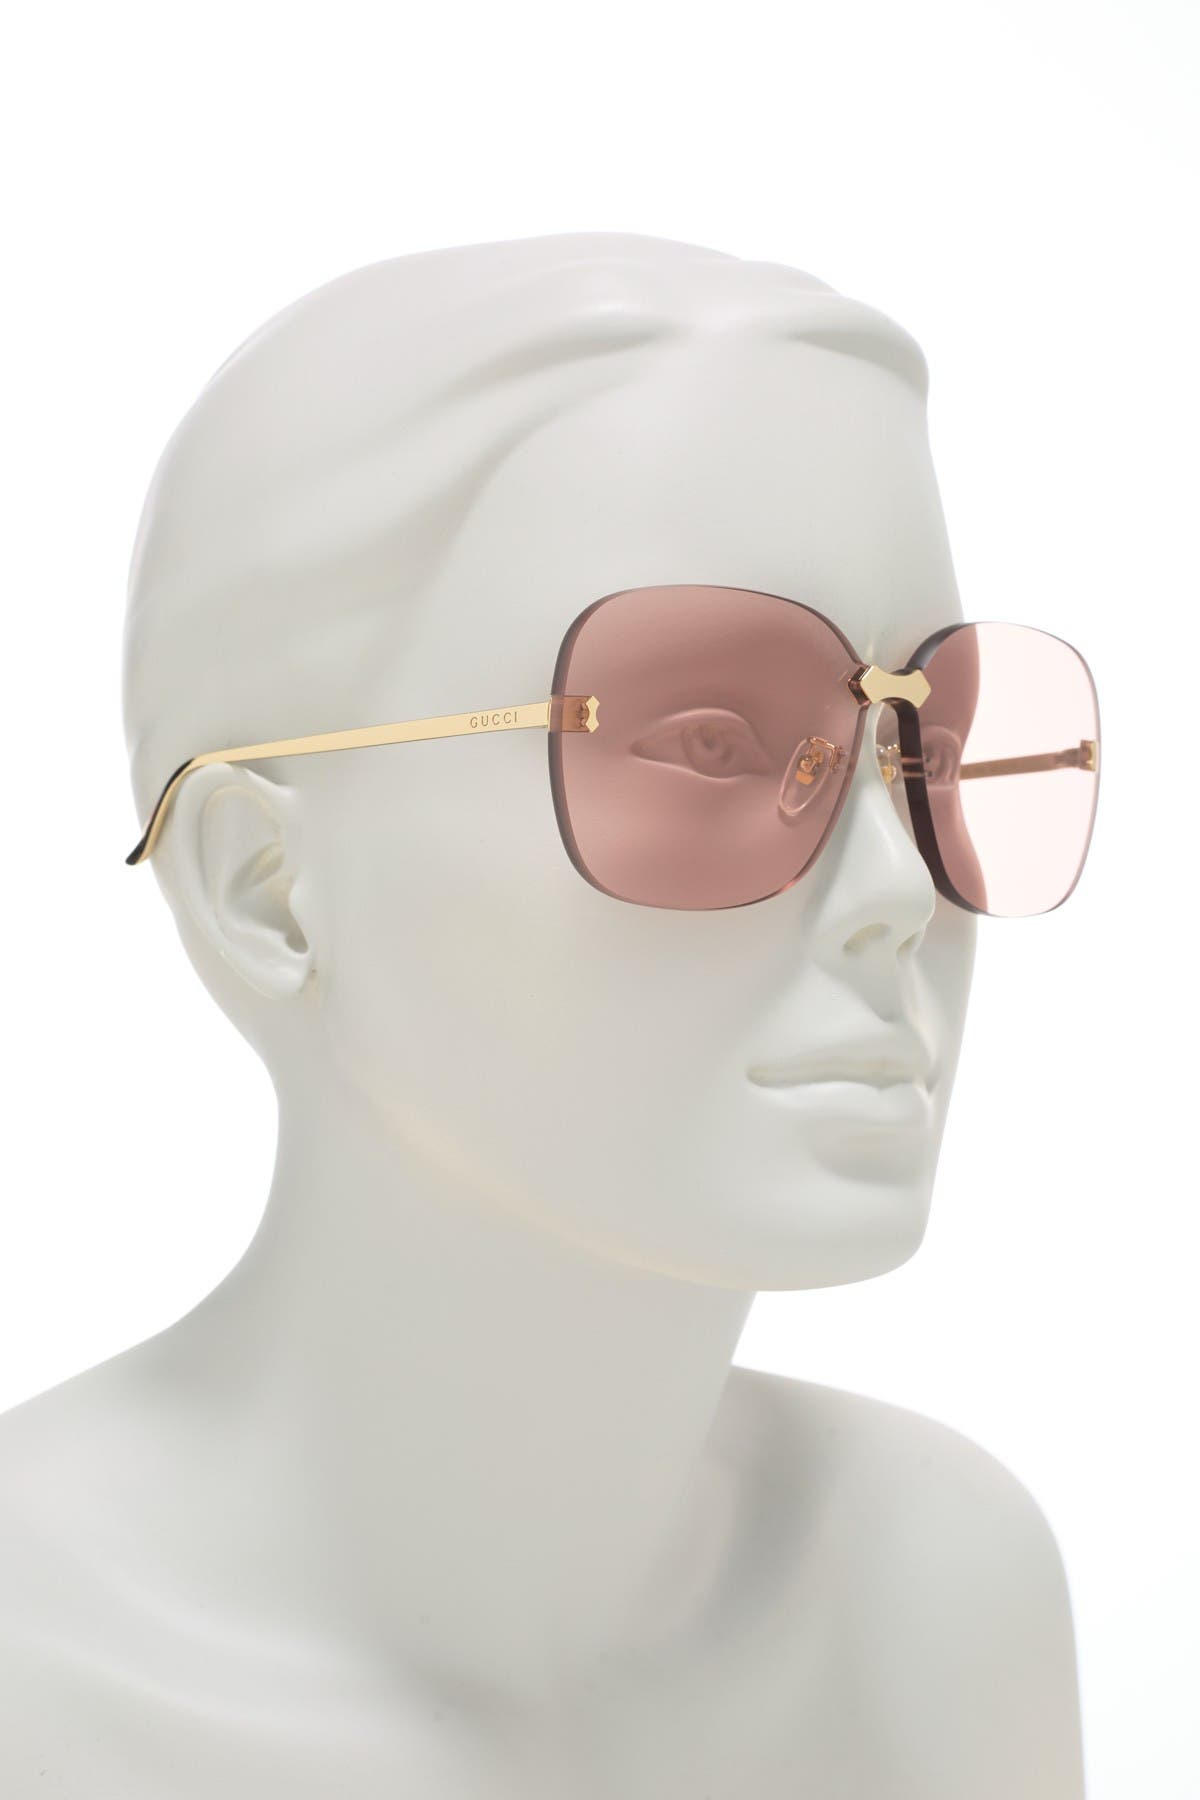 Gucci 99mm Oversized Sunglasses In Gold Gold Pink